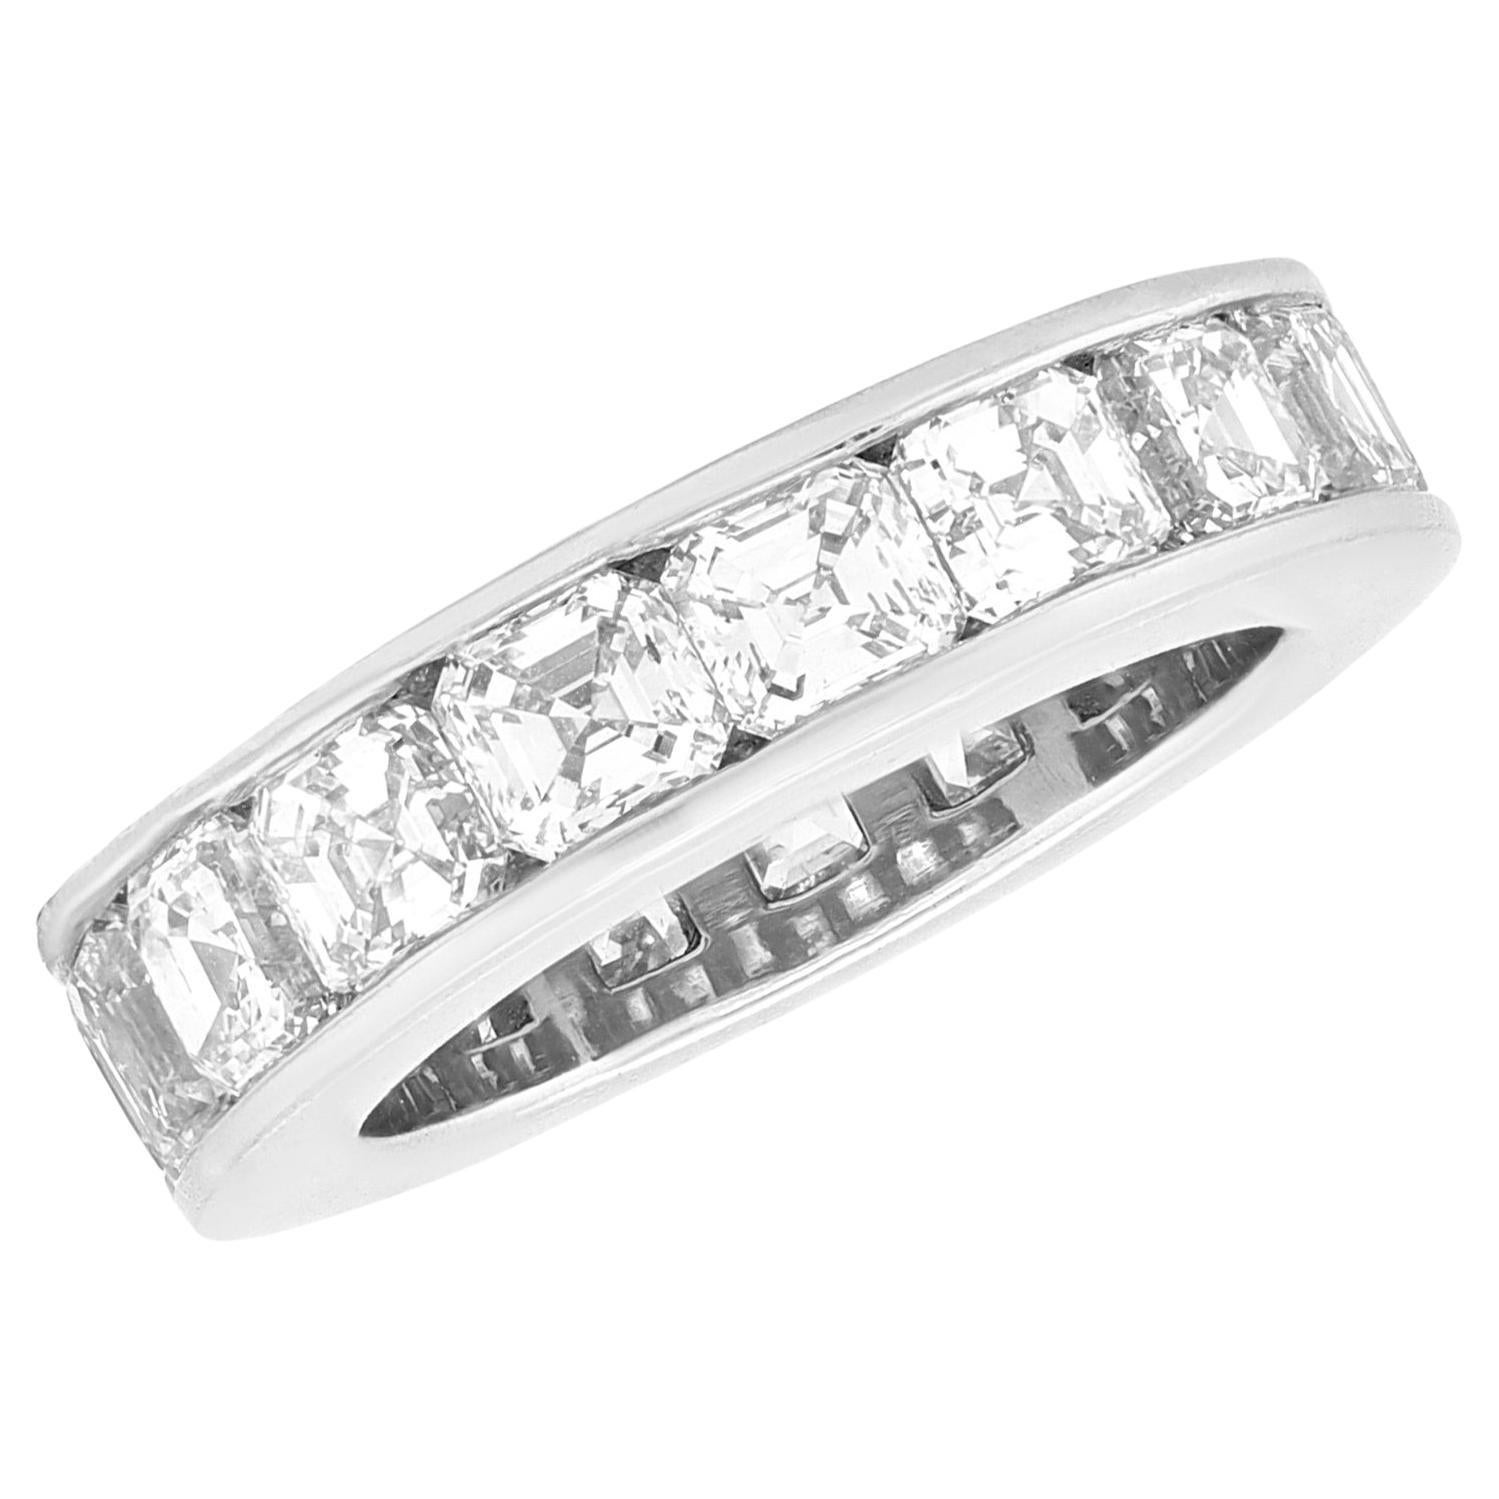 Diana M. platinum diamond channel set eternity band all the way around features 